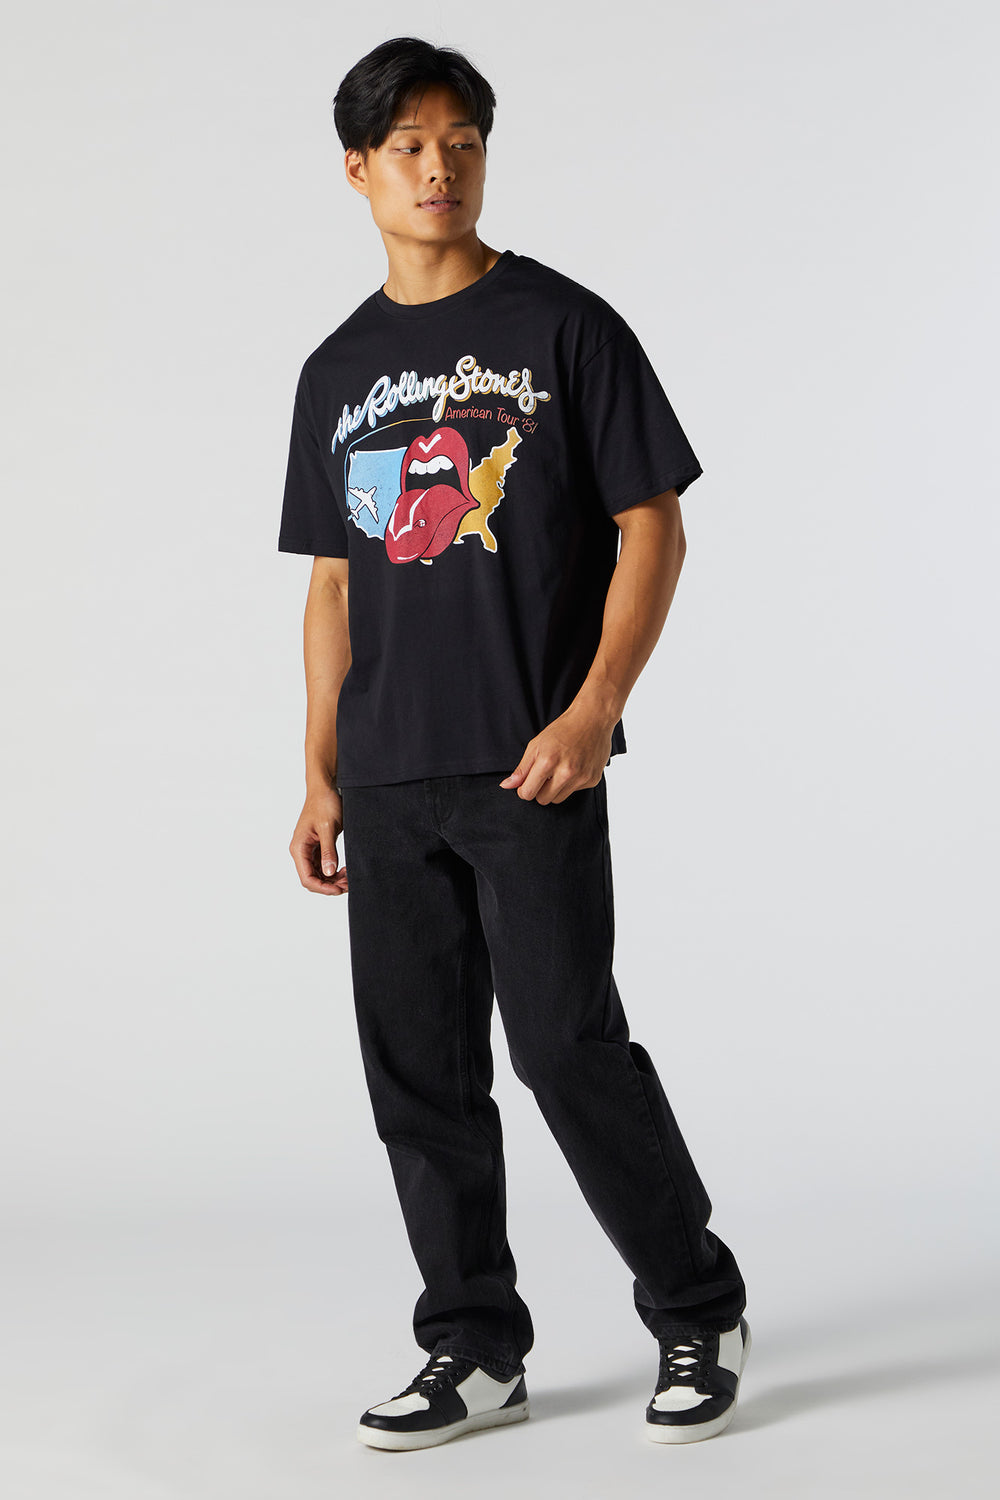 Rolling Stones Graphic T-Shirt Rolling Stones Graphic T-Shirt 3